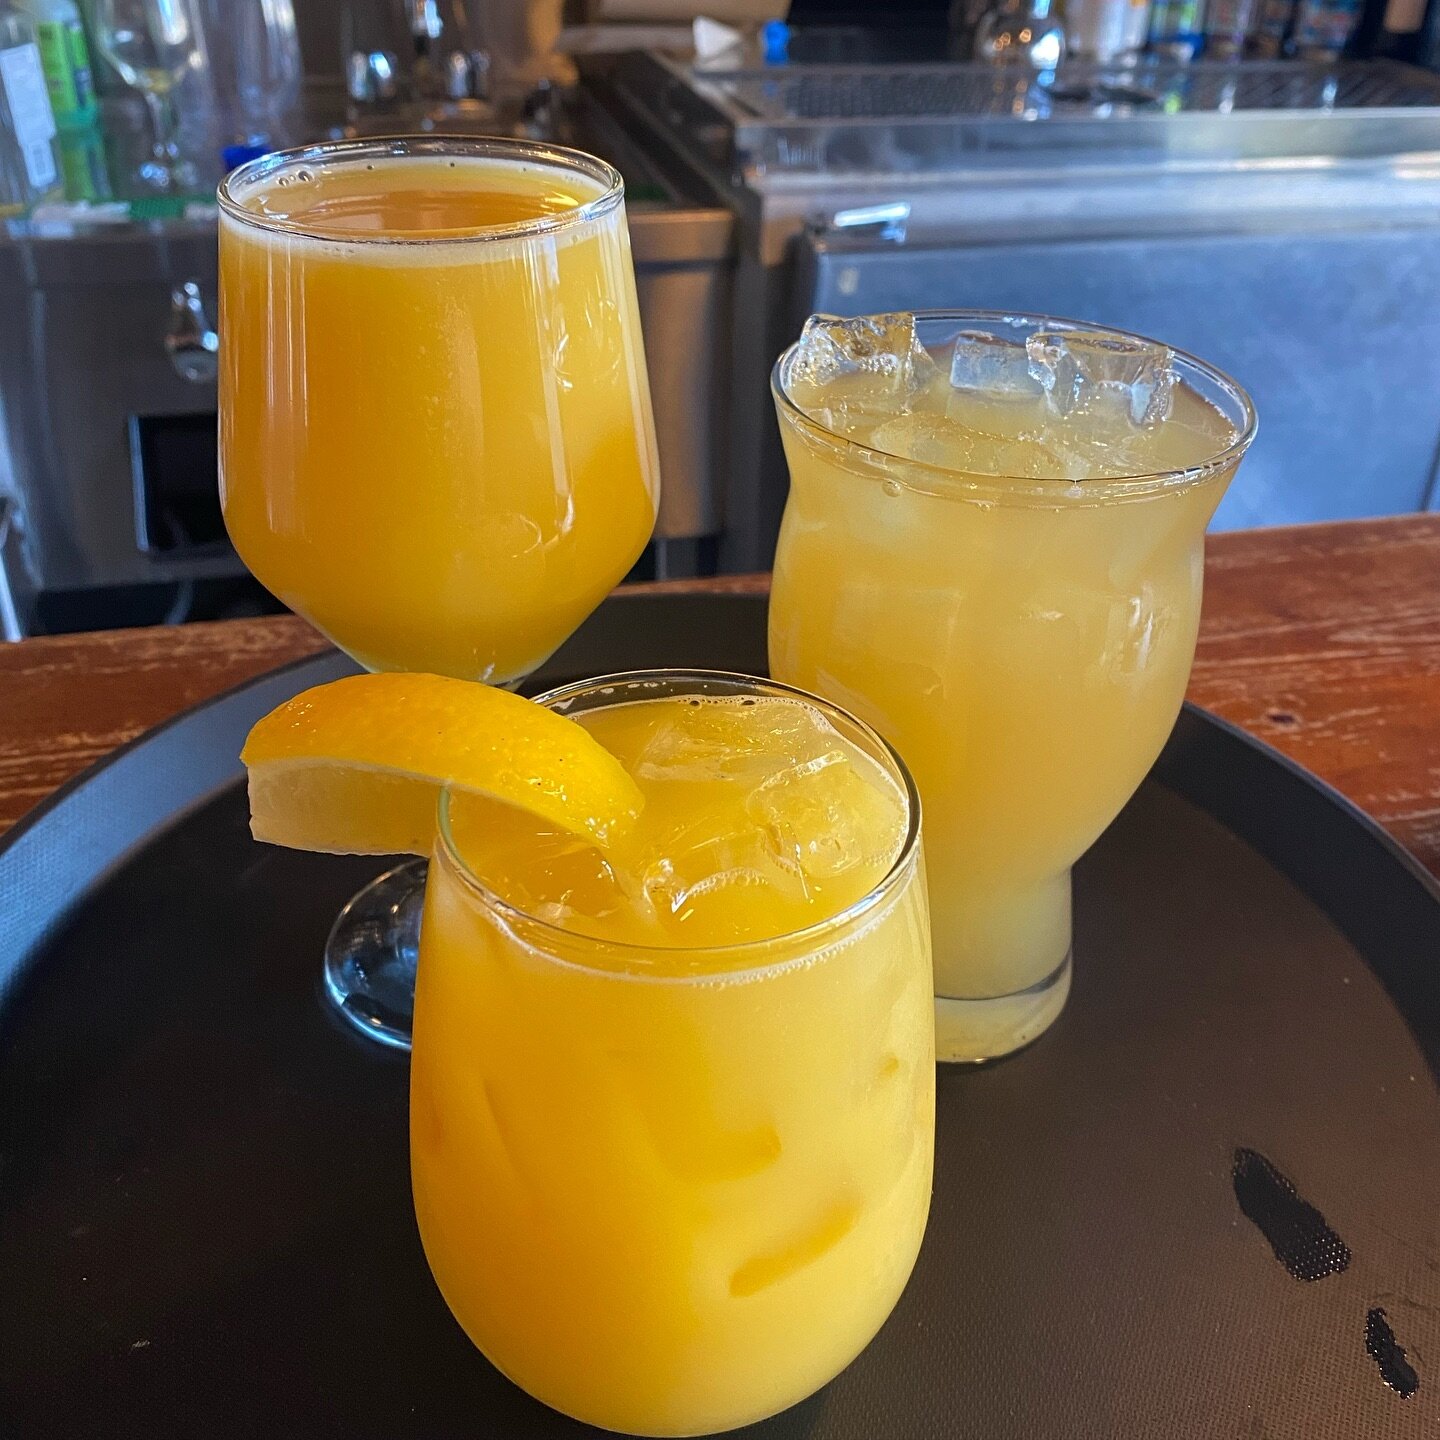 Brunch Cocktails🍹
~ Cheeky Mimosa (white wine, OJ, ginger ale) 
~ Summer Splash (whisky, peach schnapps, OJ, ginger ale) 
~ Tropical Tiger (spiced rum, pineapple juice)